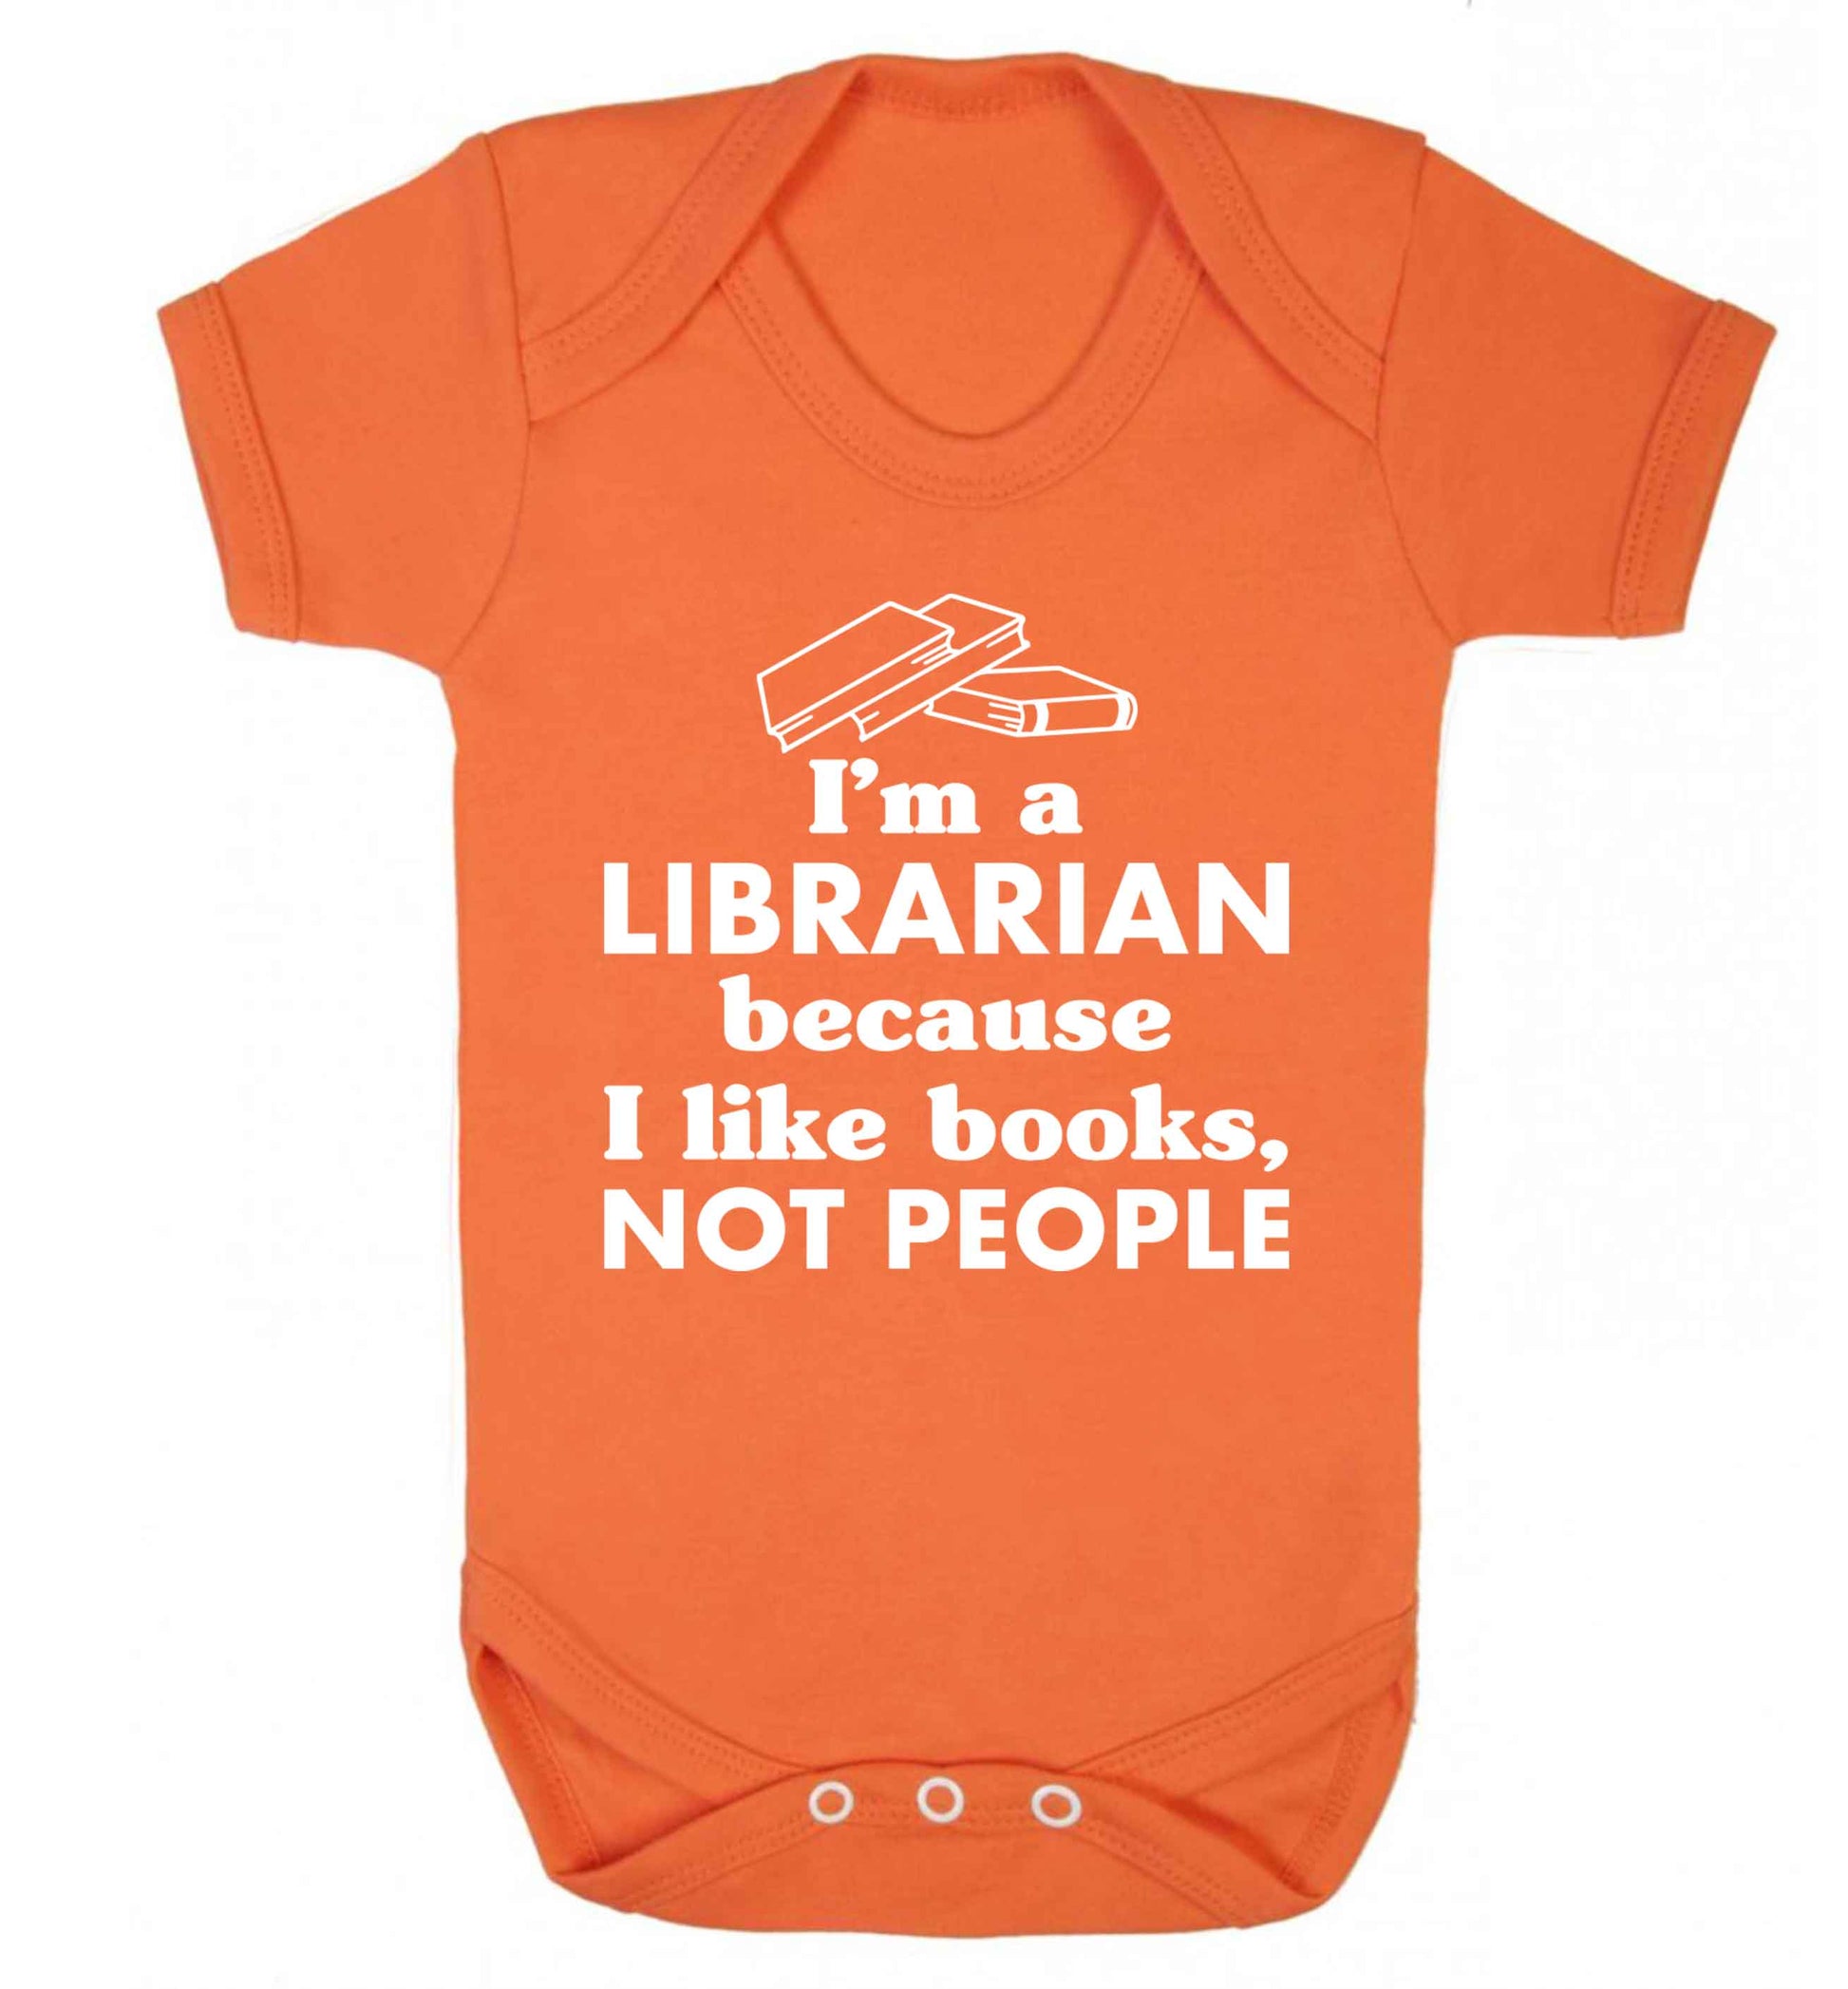 I'm a librarian because I like books not people Baby Vest orange 18-24 months